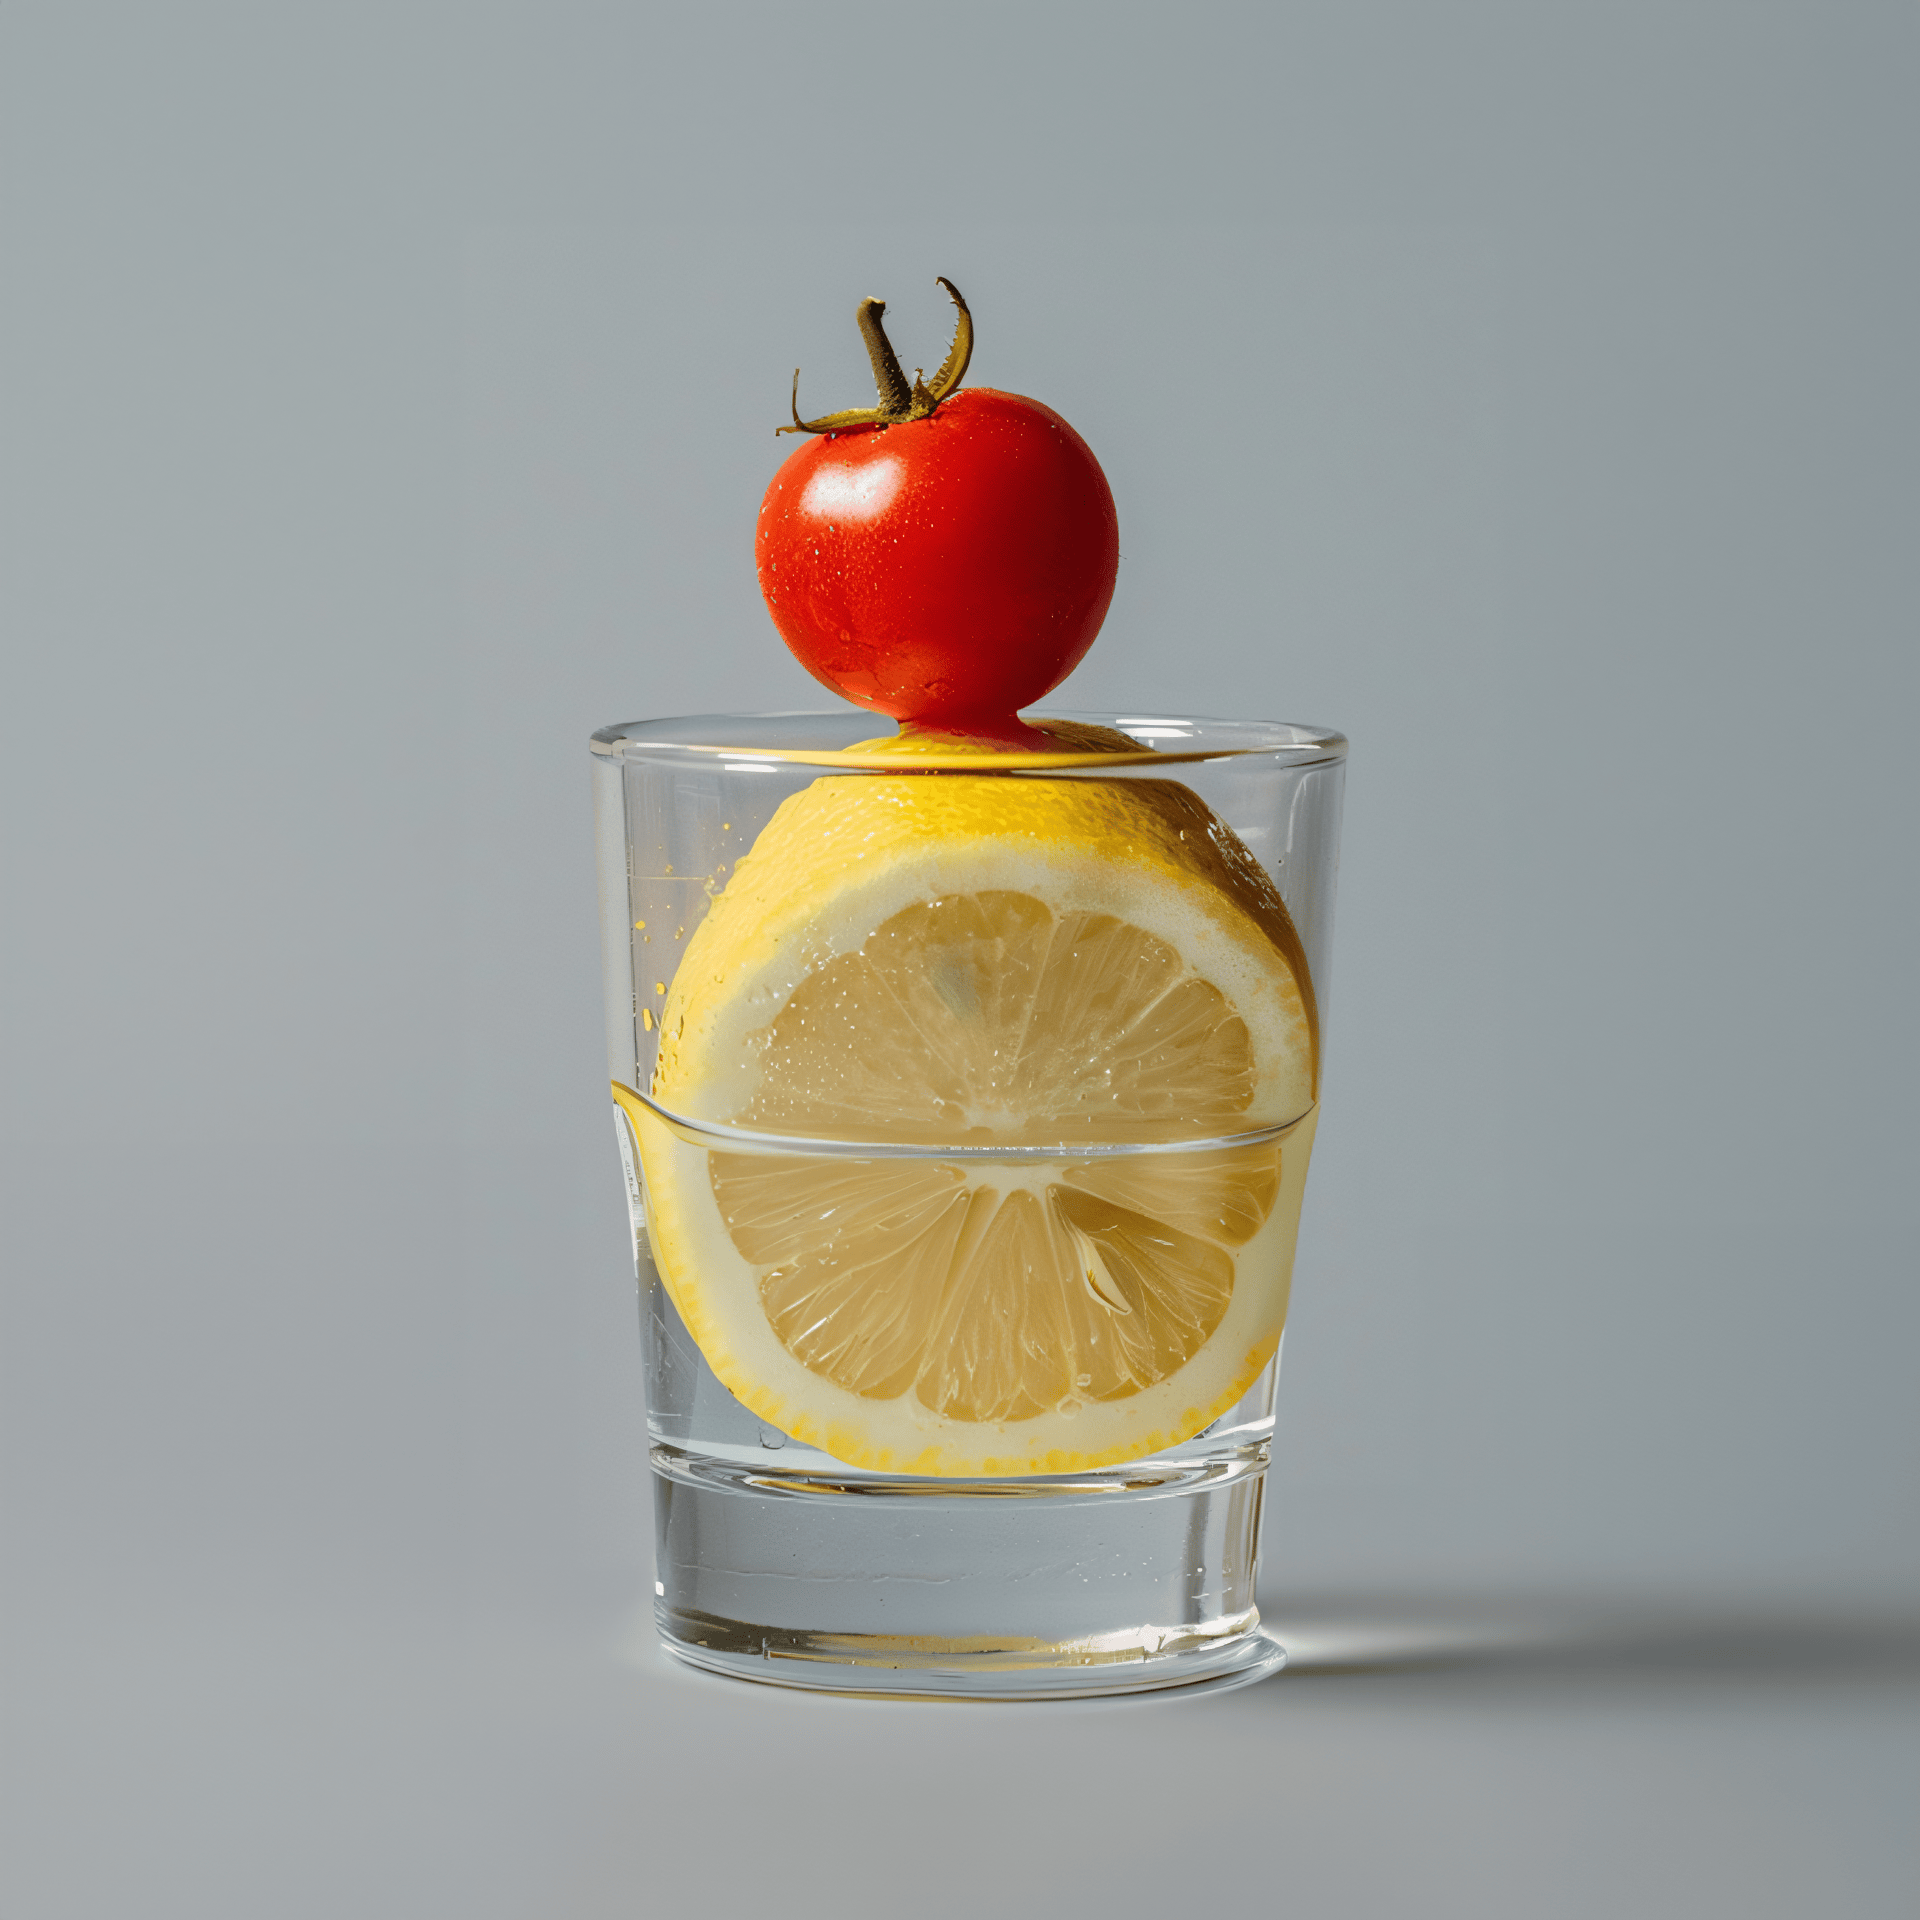 a glass cup with lemon and tomato